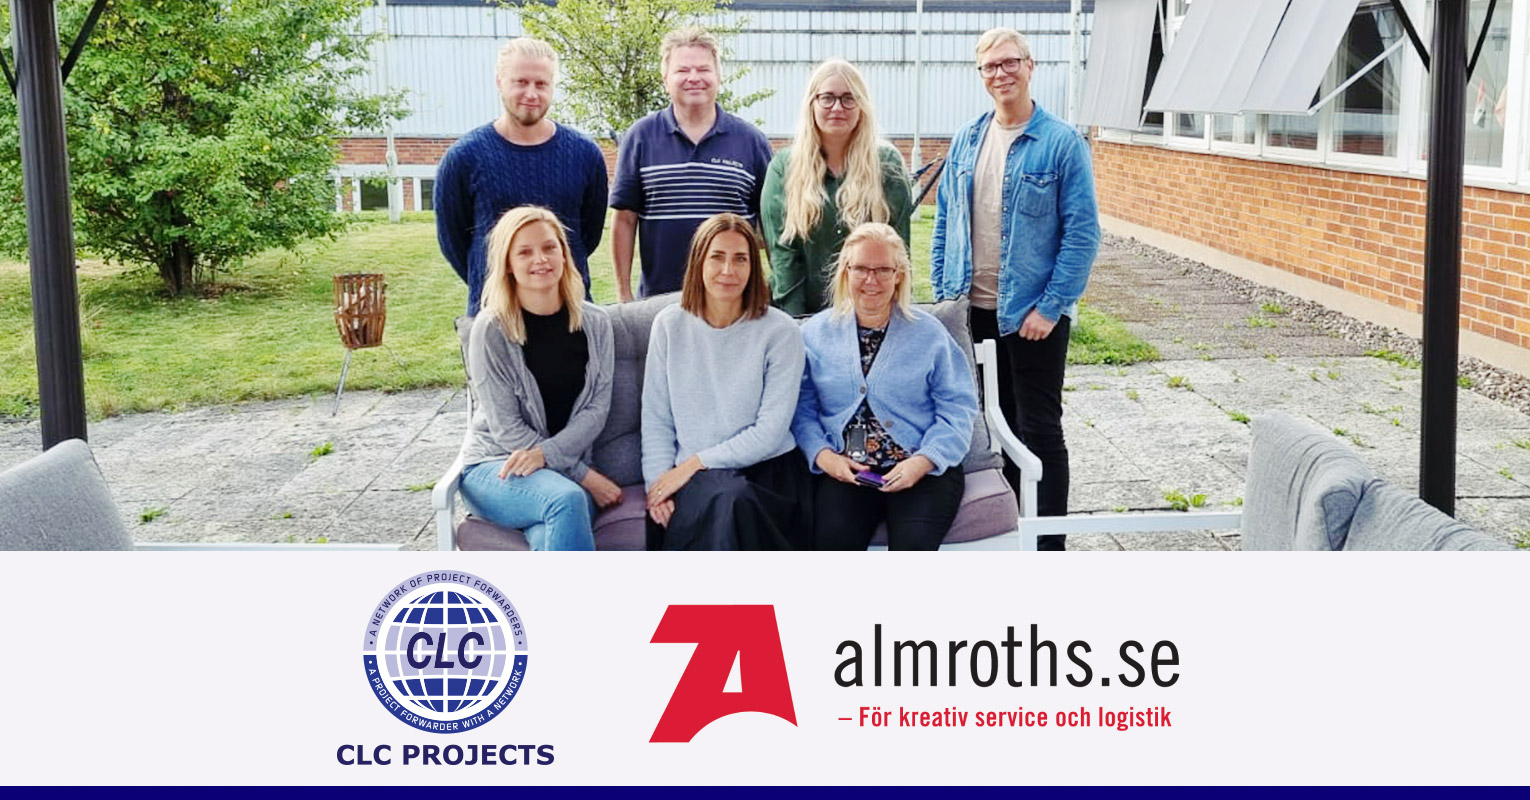 CLC Projects meeting with Almroths in Sweden